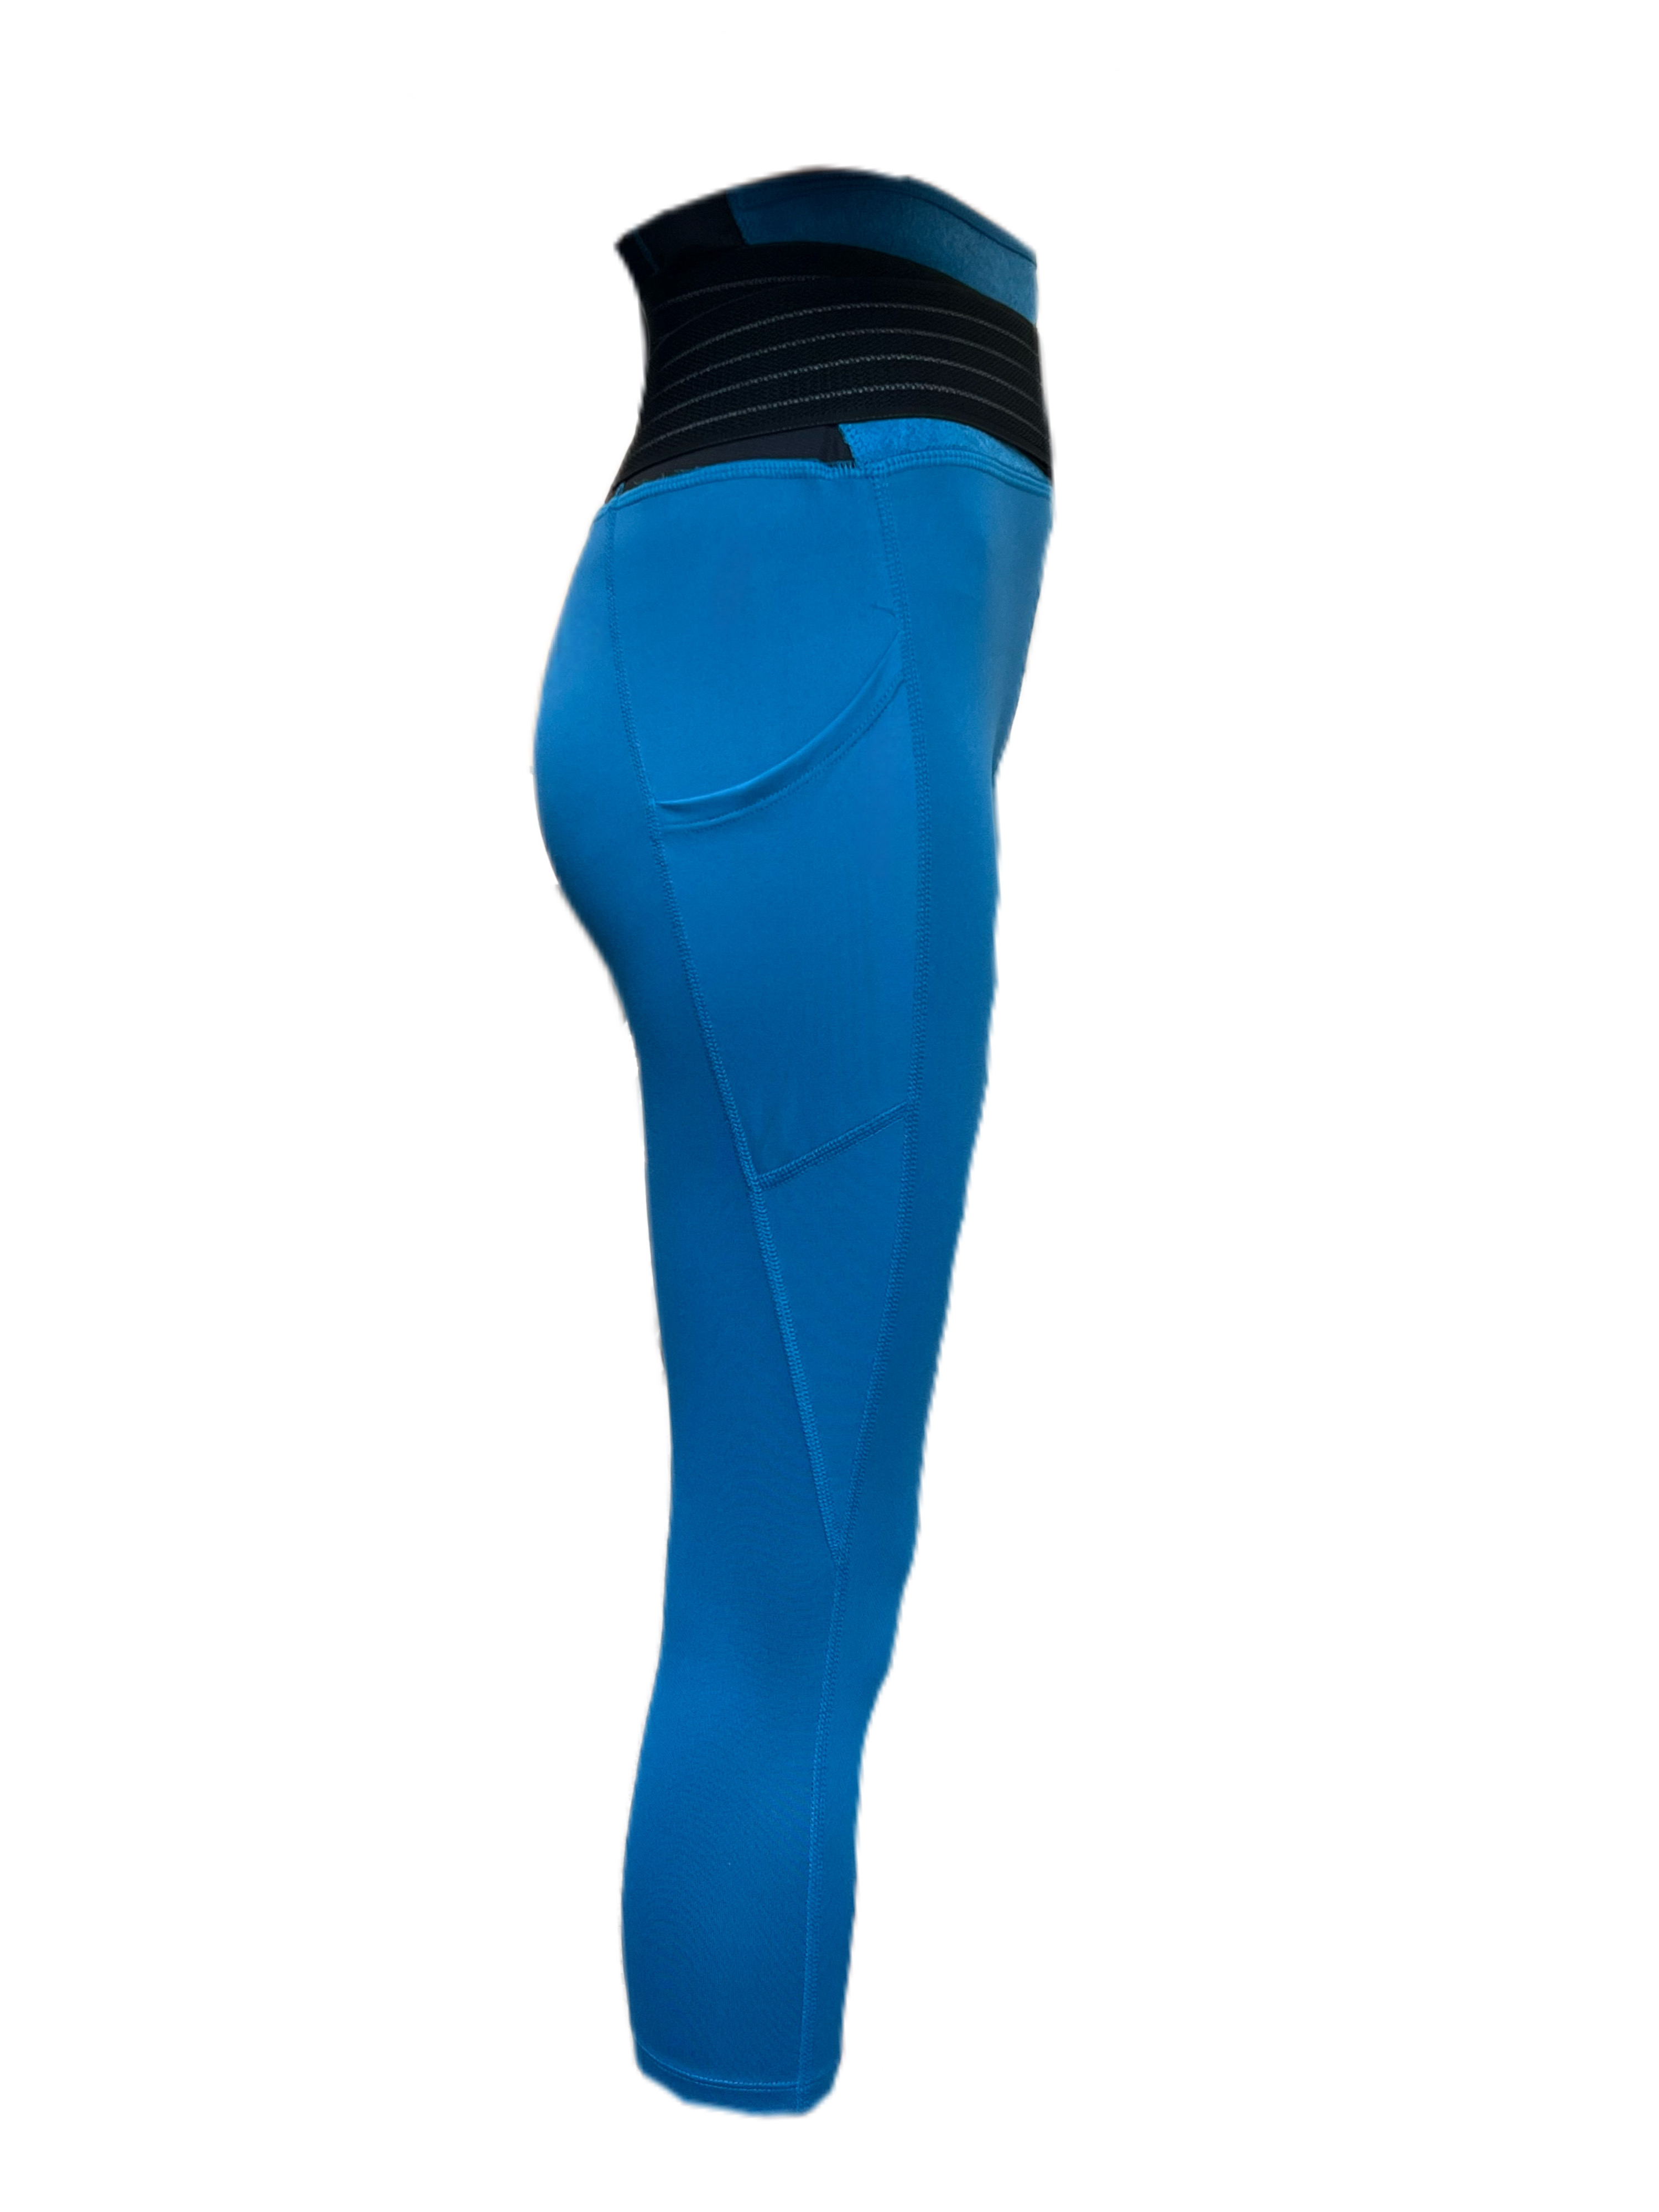 Tommie Copper Lower Back Support Compression Capri Leggings for